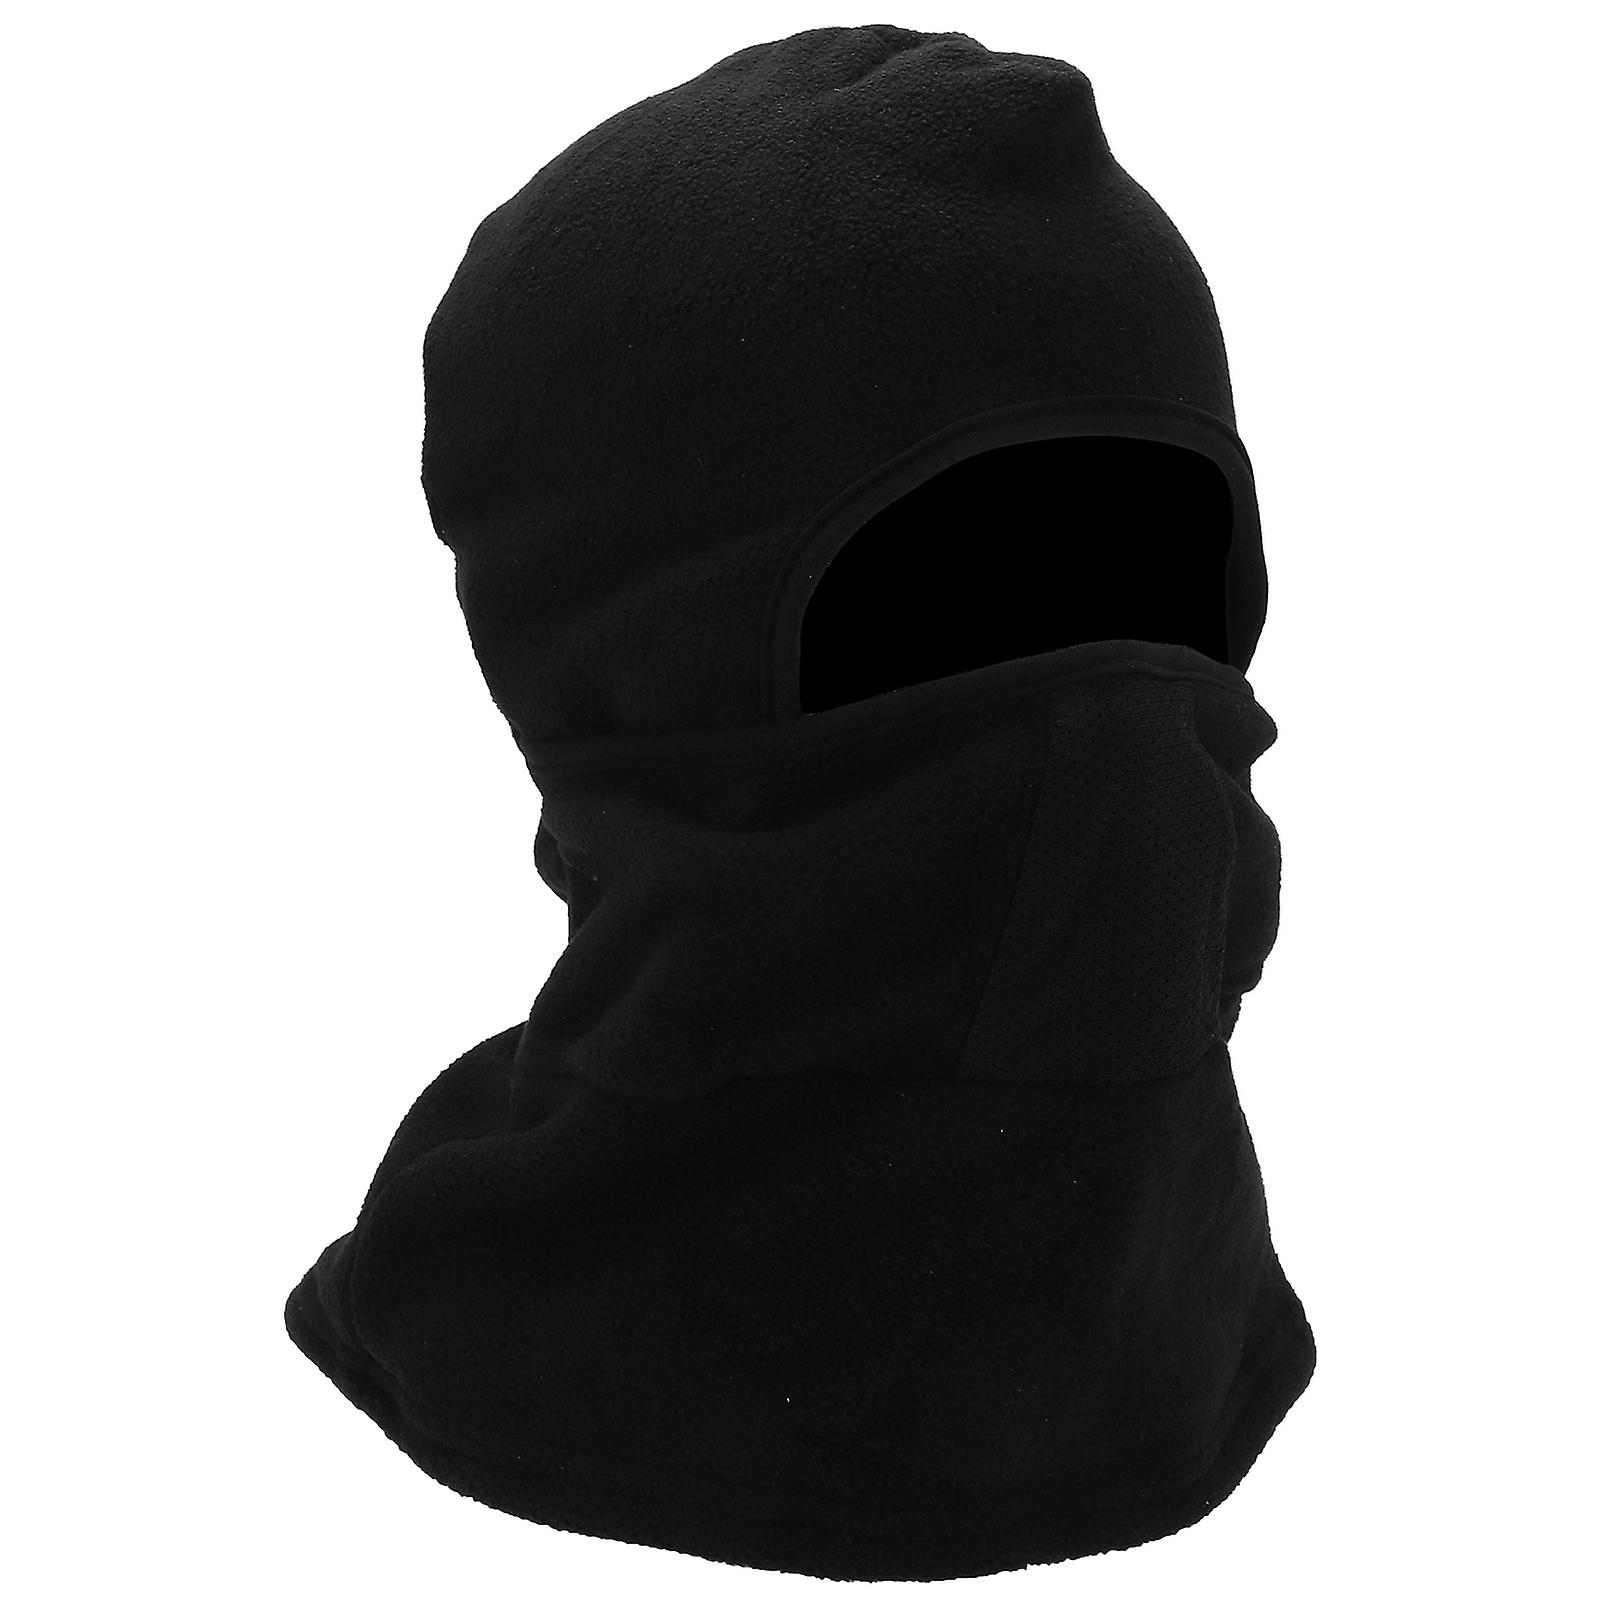 Balaclava Mask Thickened Warm Polyester Full Face Mask Neck Warmer For Running Cycling Skiing Winter Sports